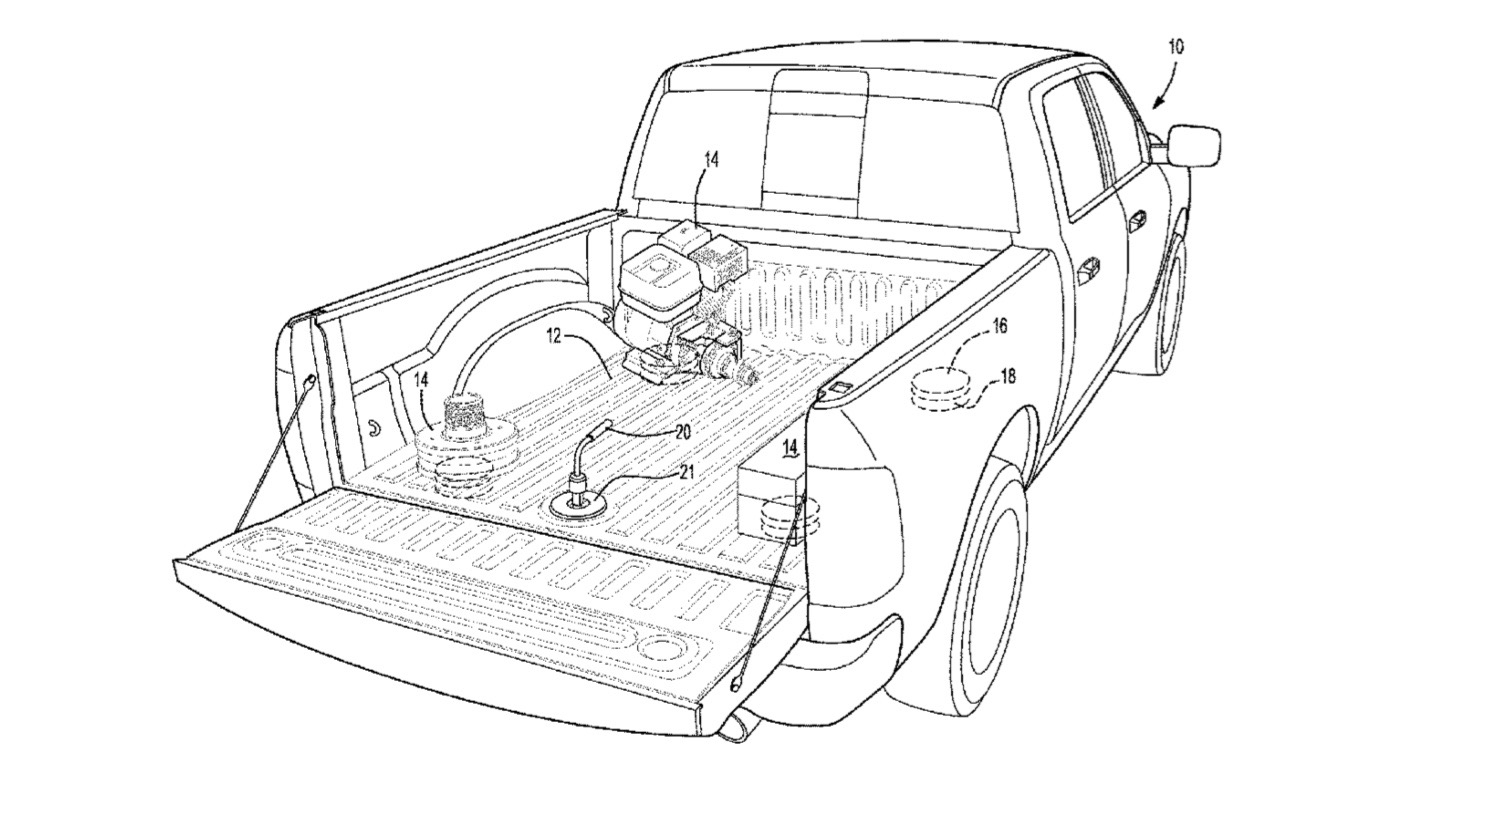 Ford patents magnetic truck bed